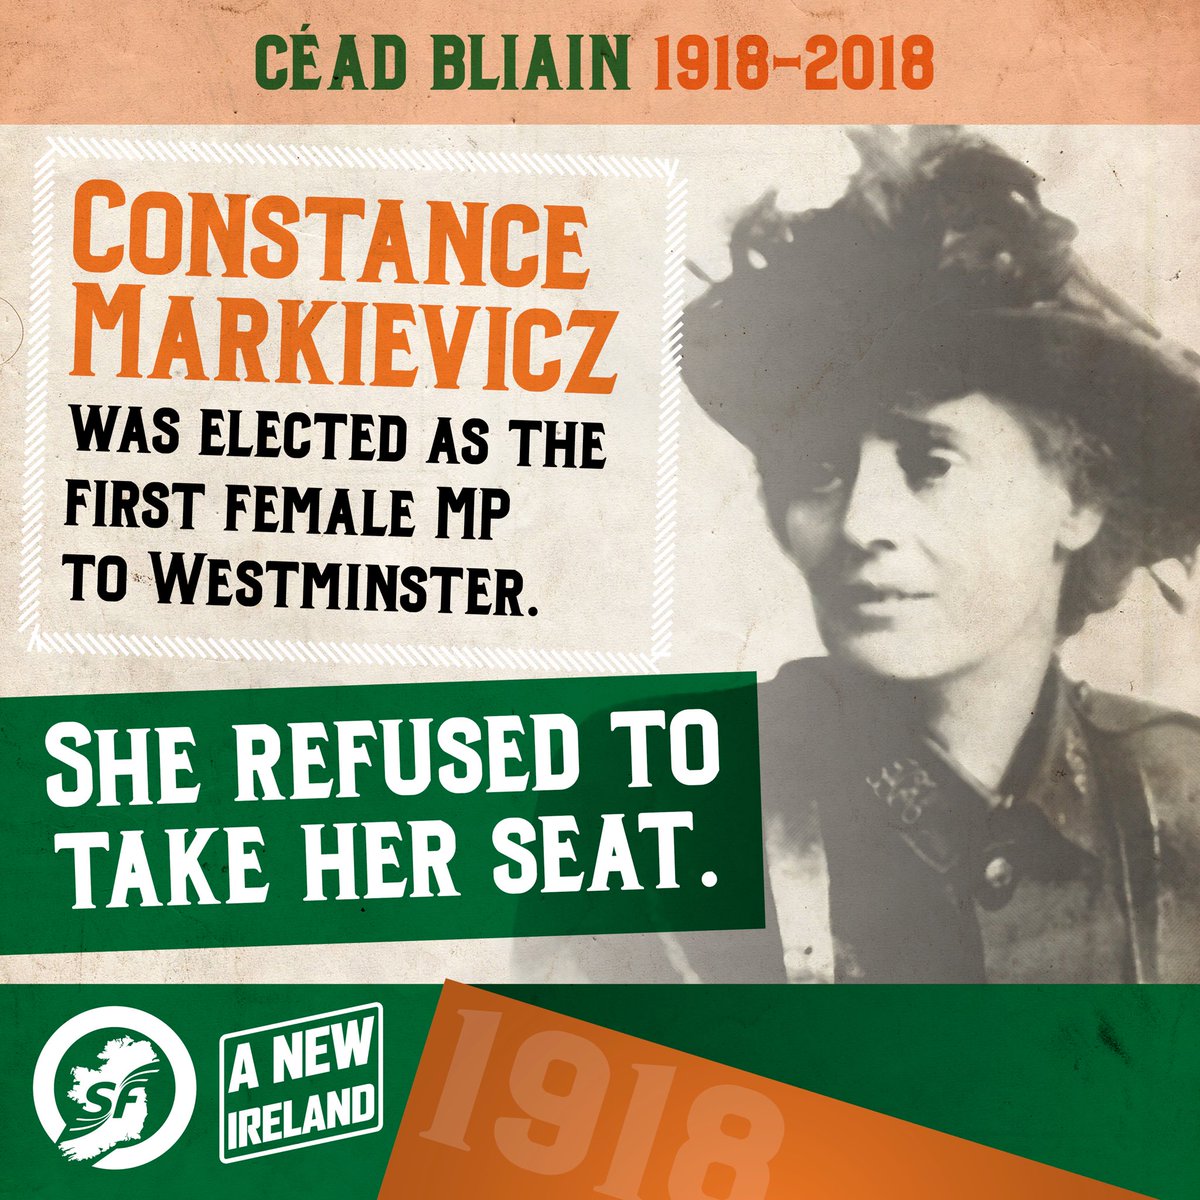 On this day in 1918 — Constance Markievicz was declared elected to Westminster as the first female MP. She refused to take her seat. #Vótáil100 #1918Election